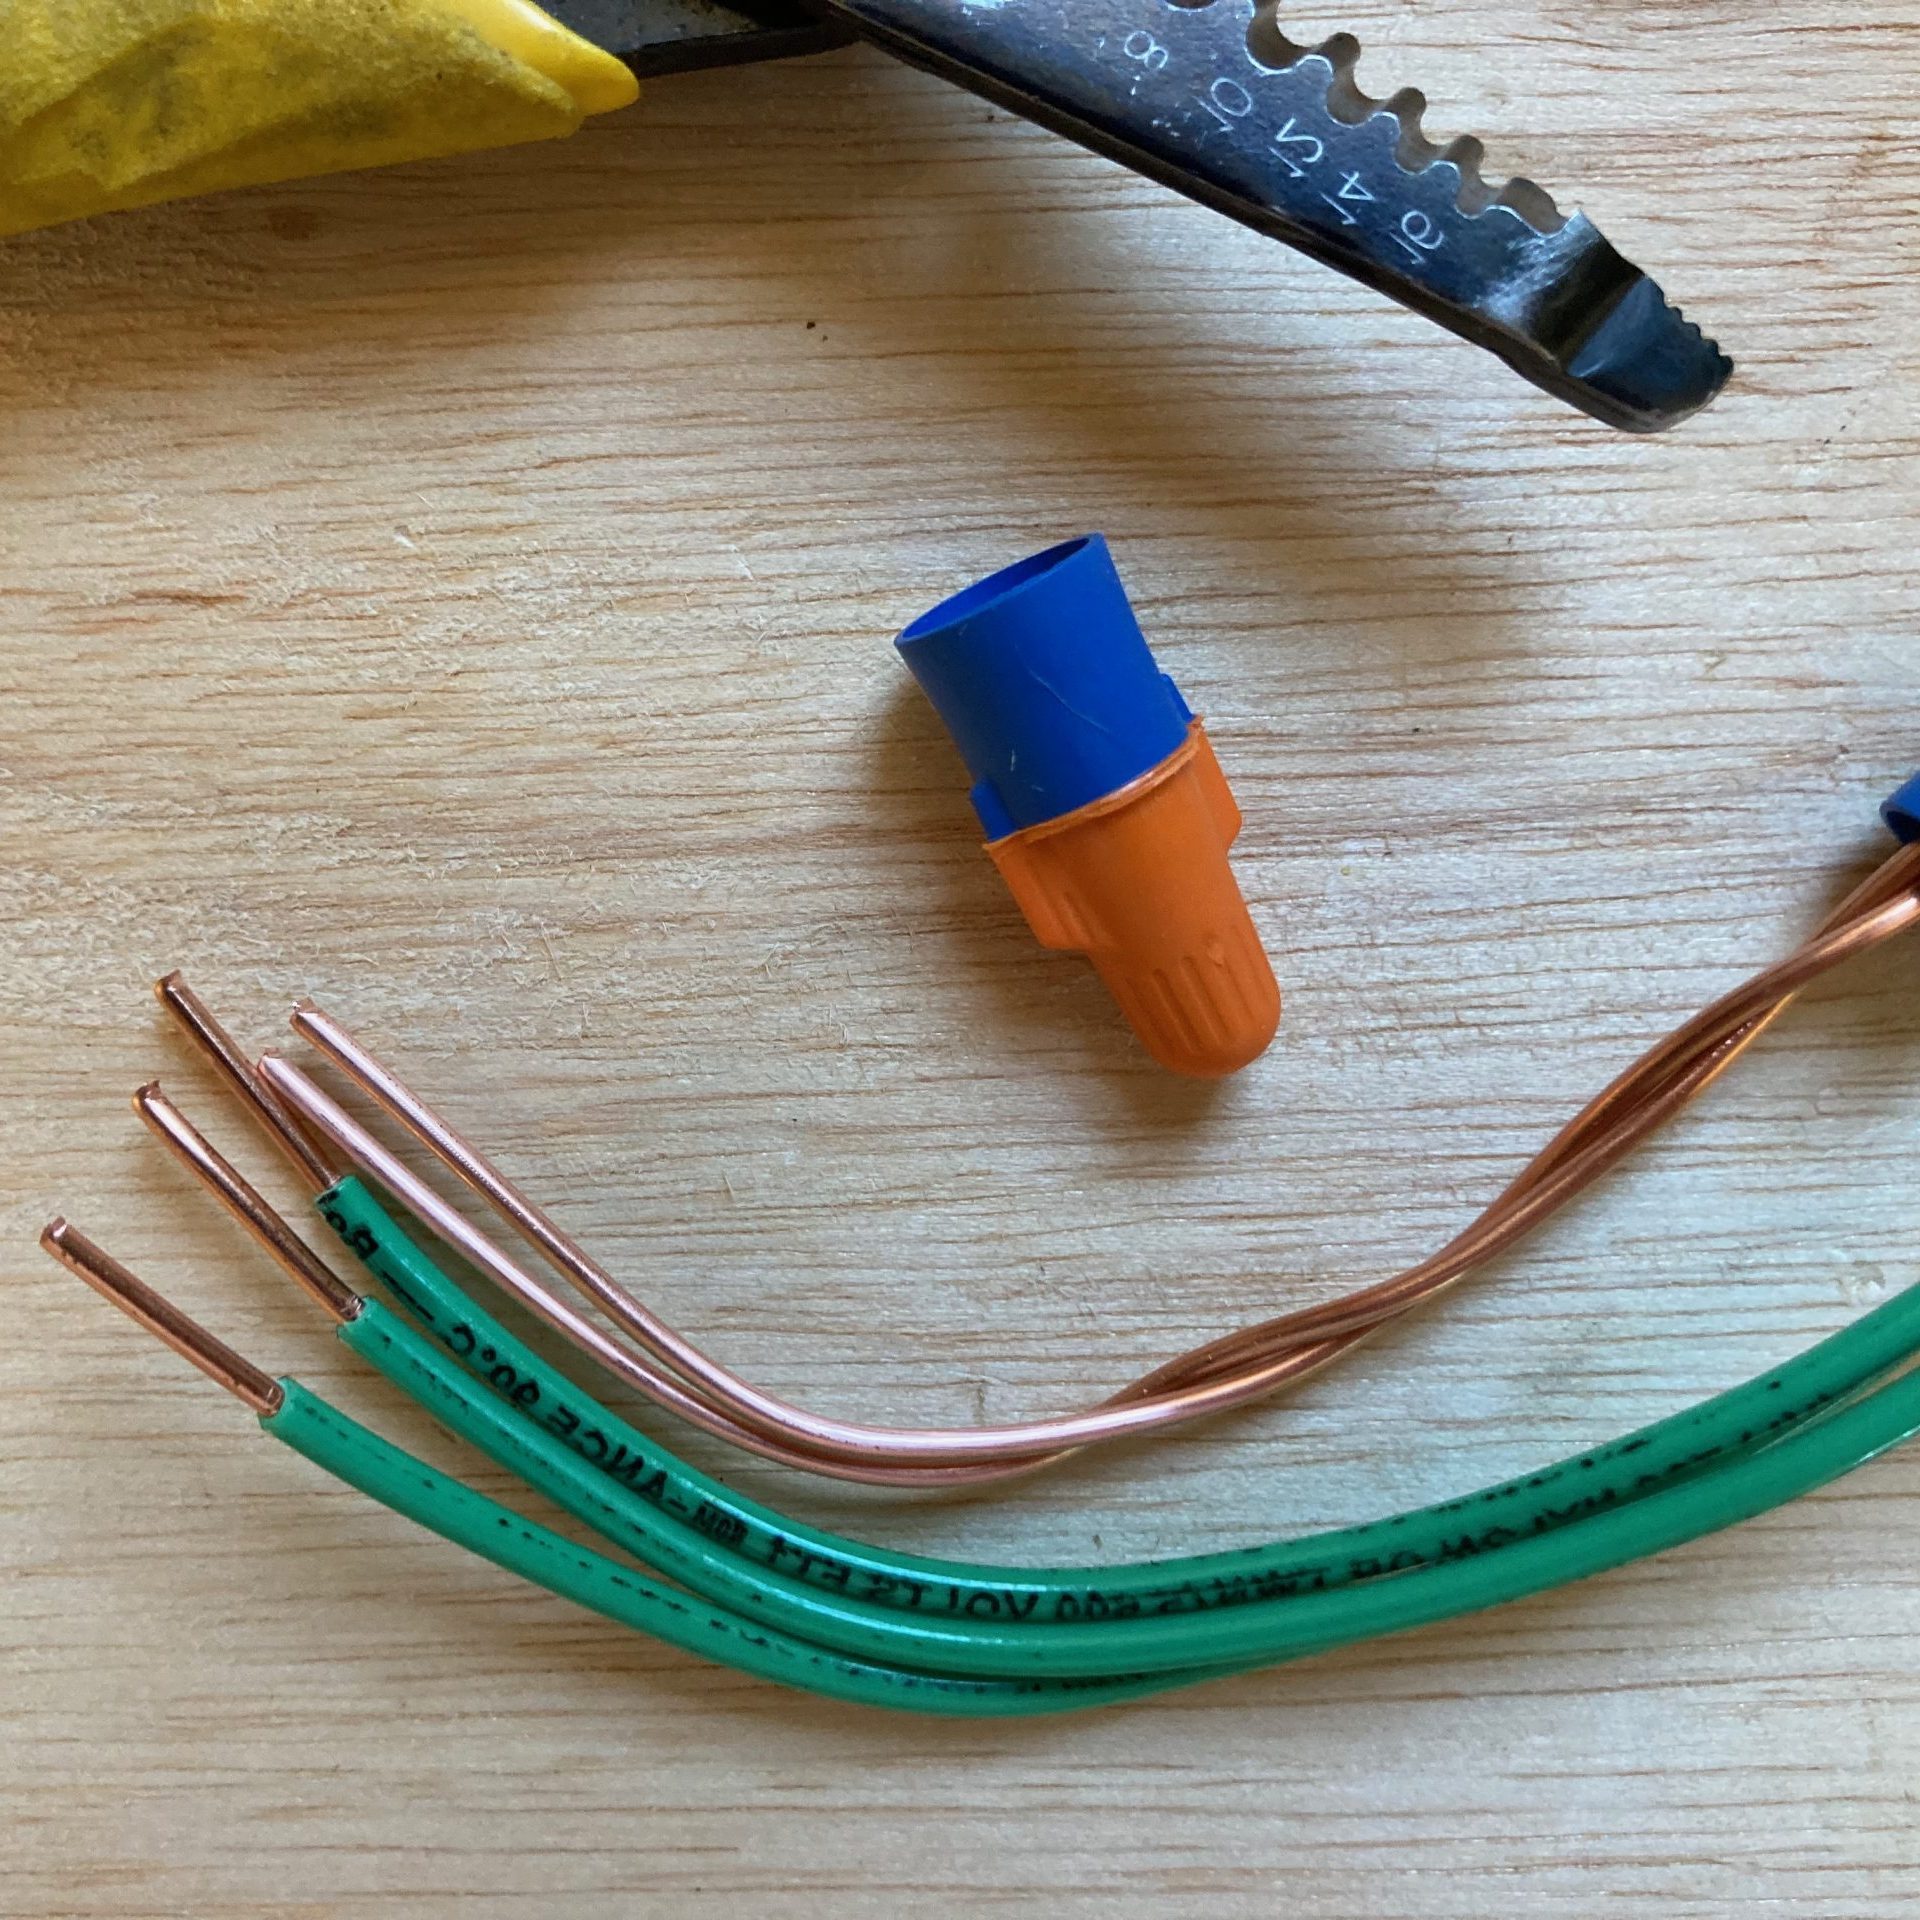 Yes, electrical wire colors do matter - Nickle Electrical Companies